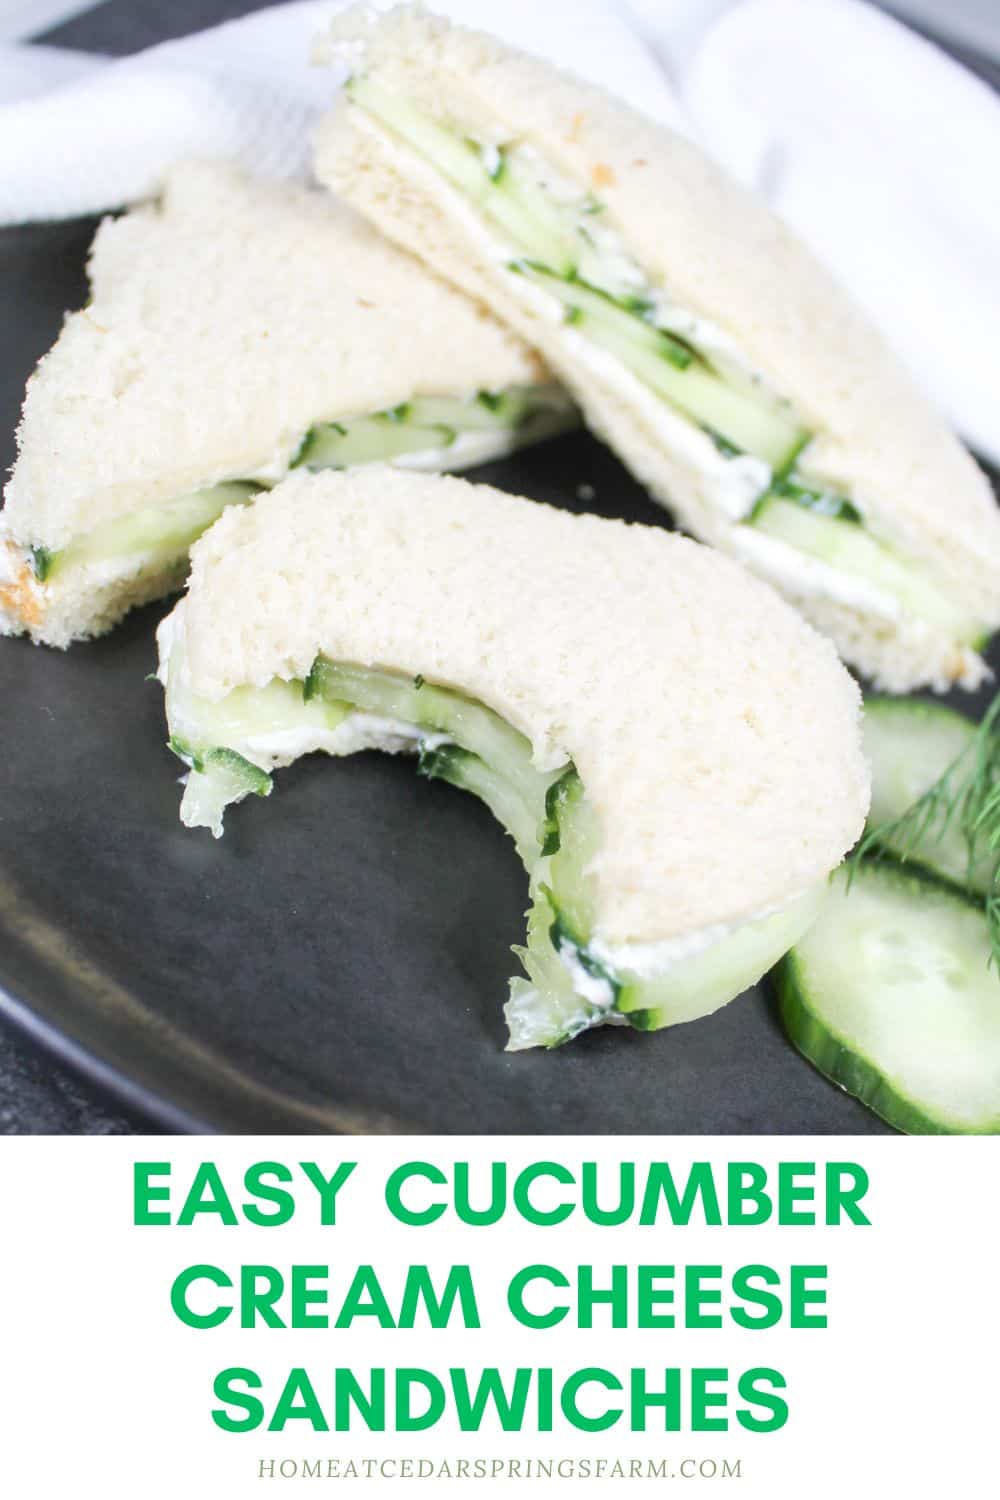 Cucumber Cream Cheese Sandwiches on a black plate with text overlay.